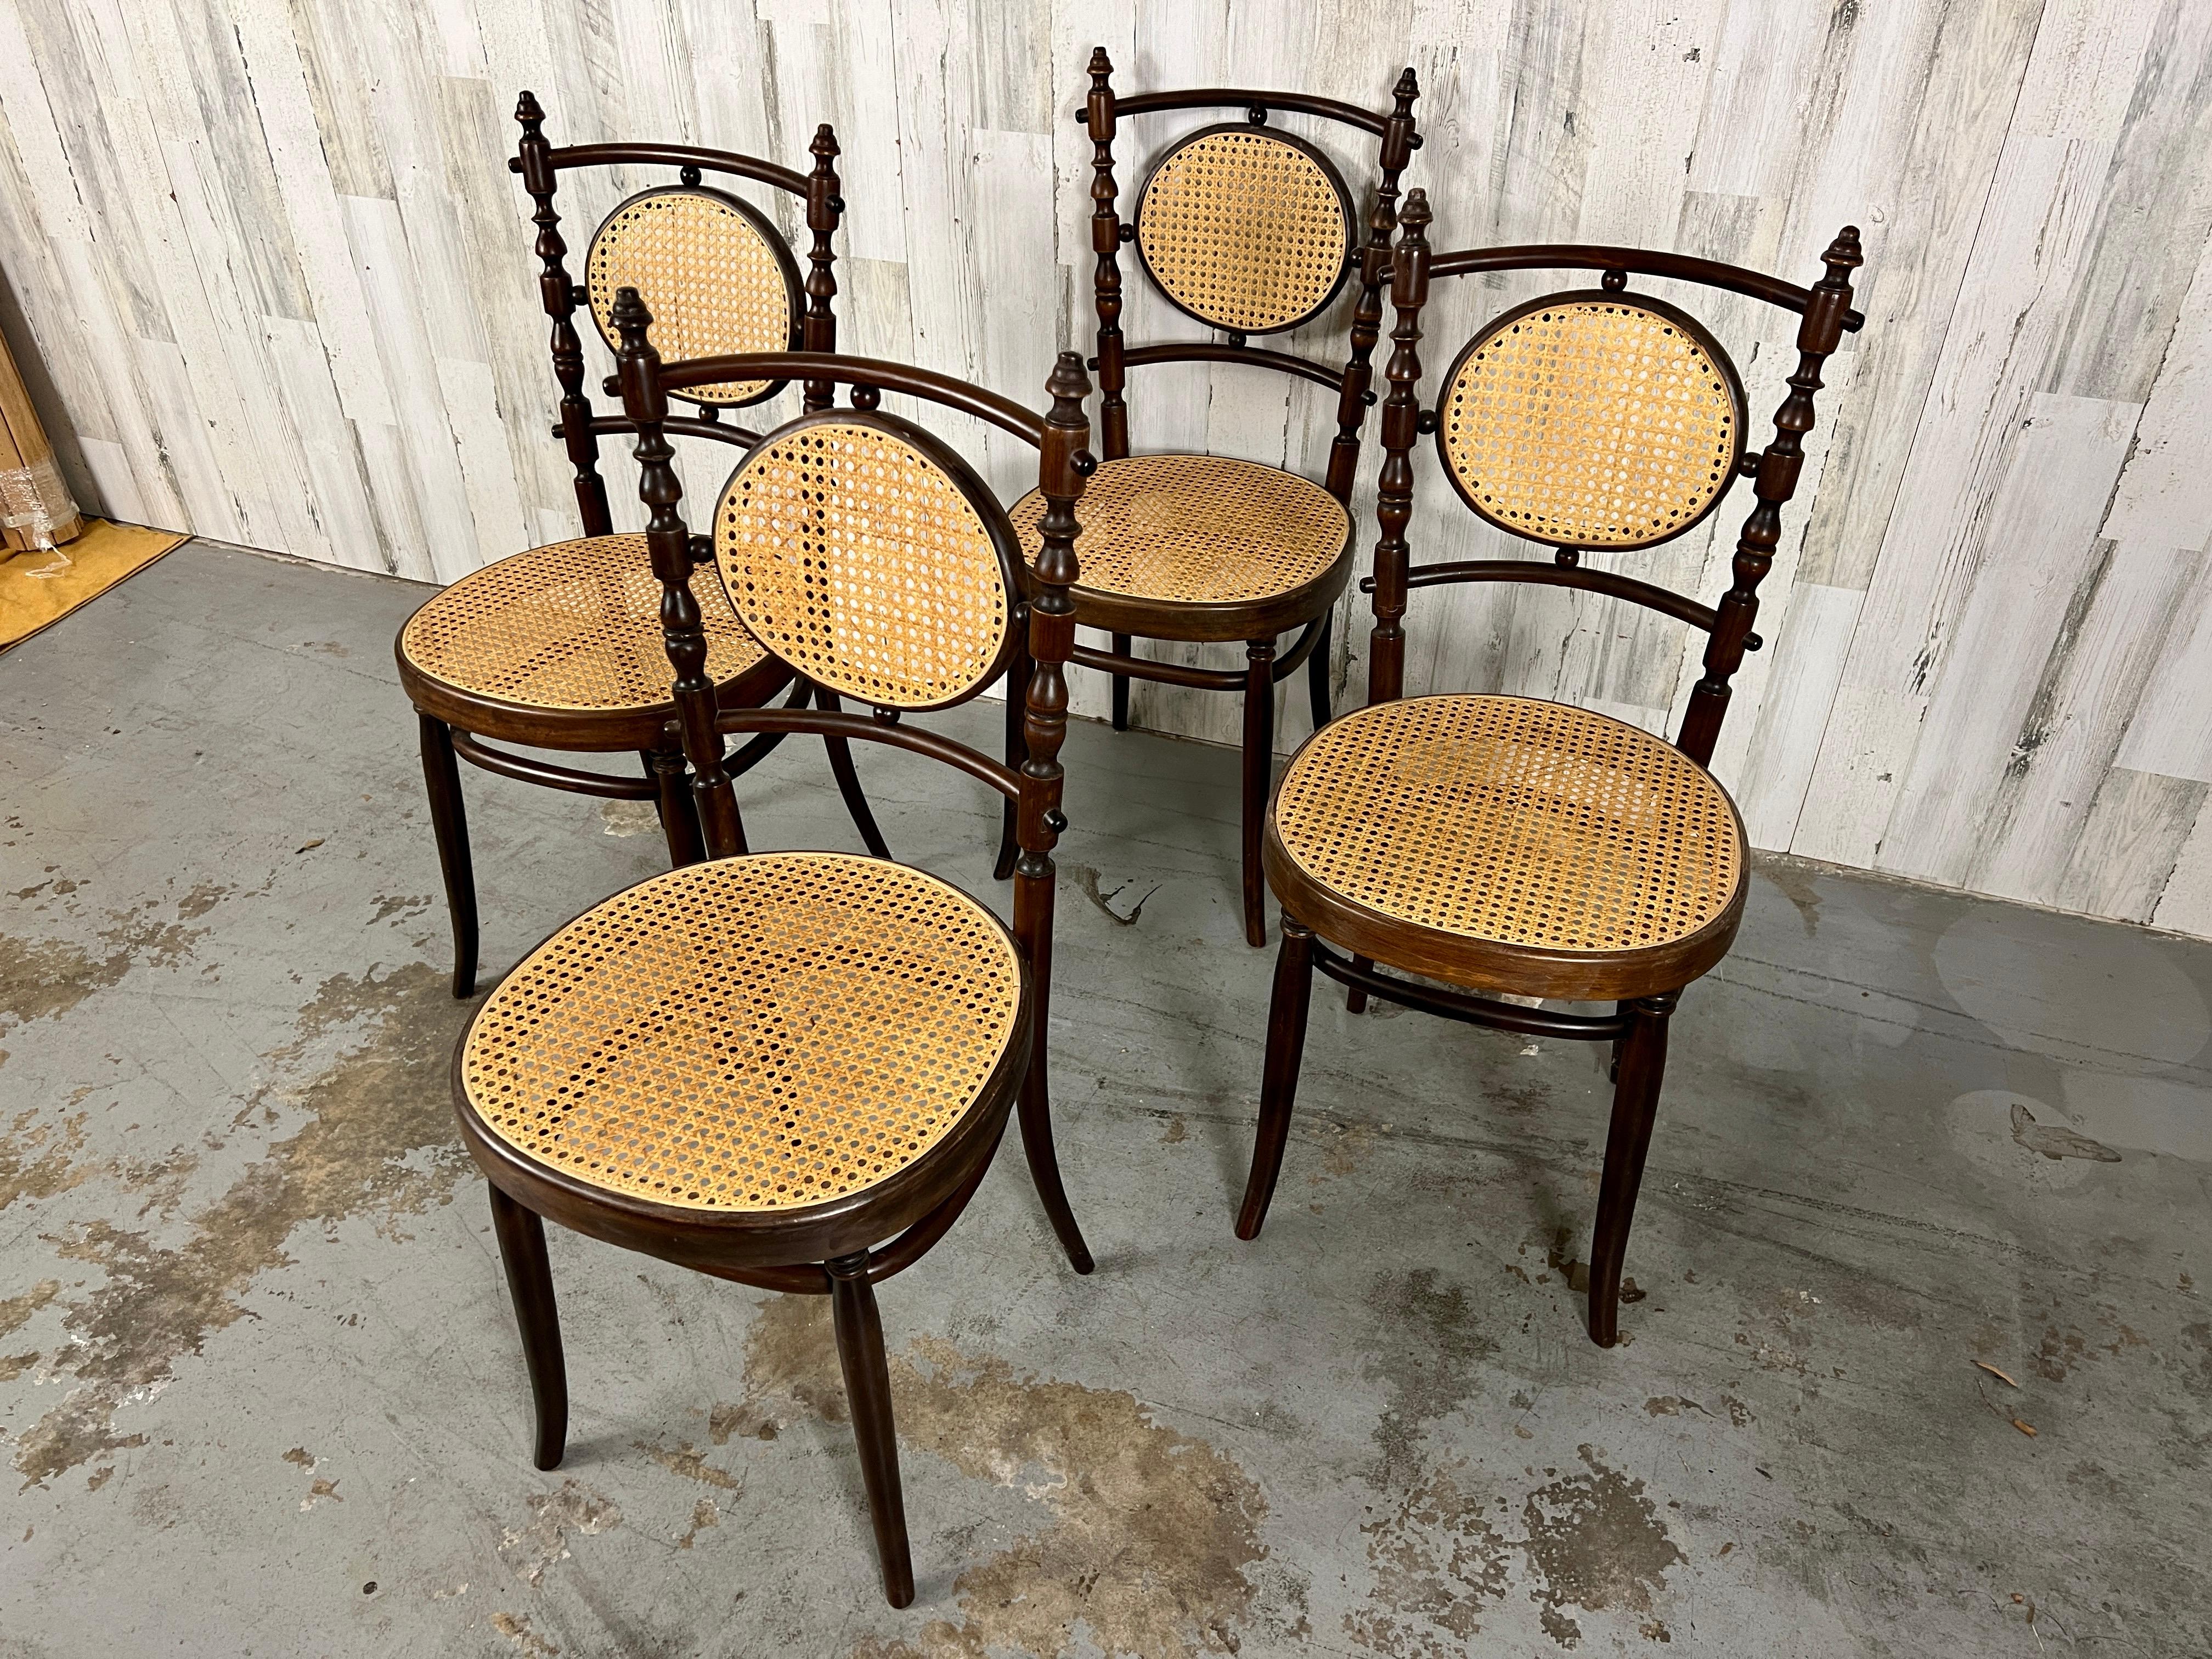 Salvatore Leone Bentwood Dining Chairs In Good Condition For Sale In Denton, TX